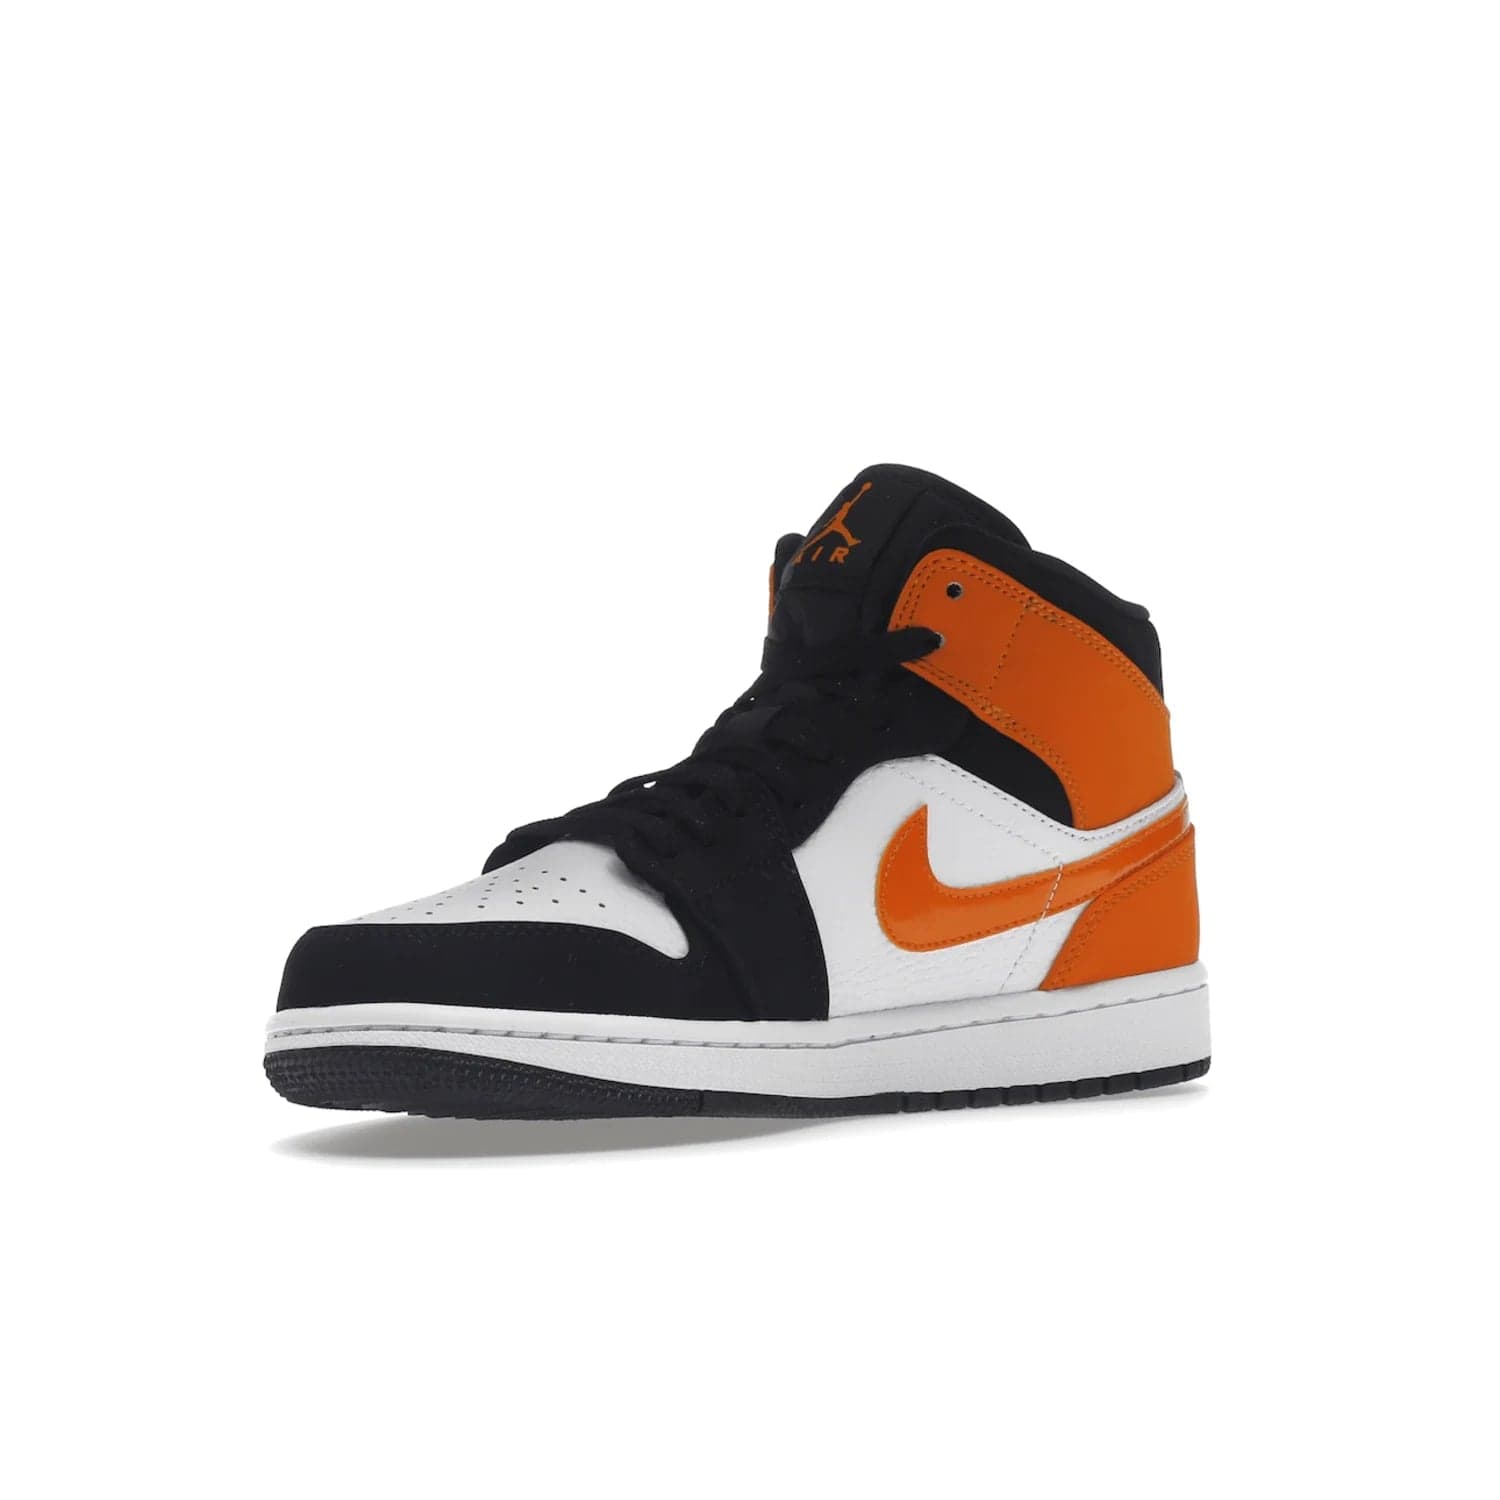 Jordan 1 Mid Shattered Backboard - Image 15 - Only at www.BallersClubKickz.com - The Air Jordan 1 Mid Shattered Backboard offers a timeless Black/White-Starfish colorway. Classic Swoosh logo and AJ insignia plus a shatterd backboard graphic on the insole. Get your pair today!